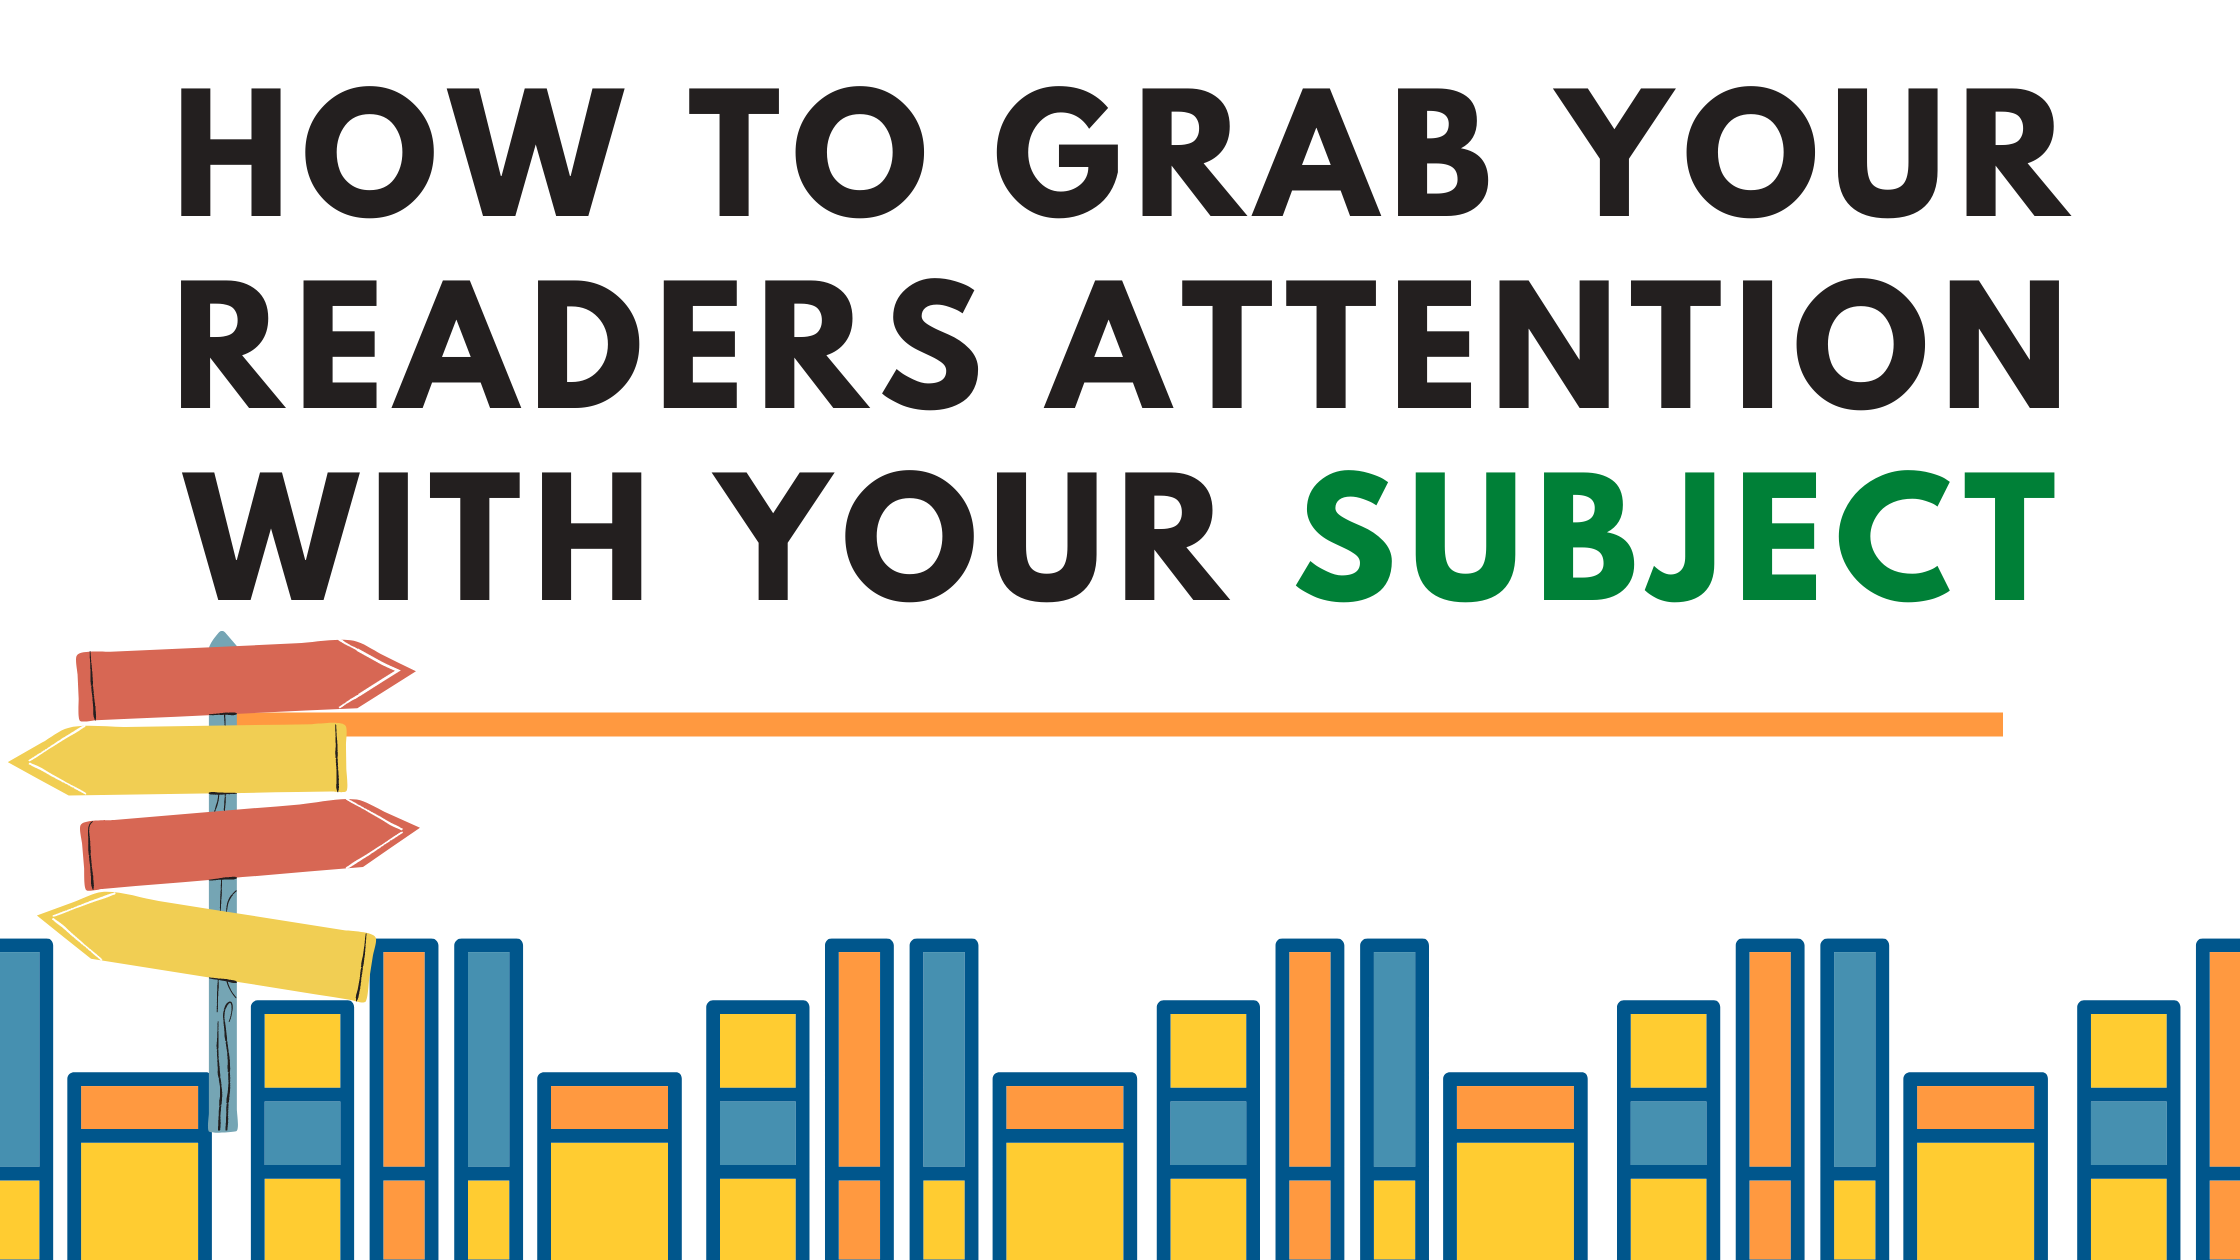 How To Grab Your Readers Attention With Your Subject